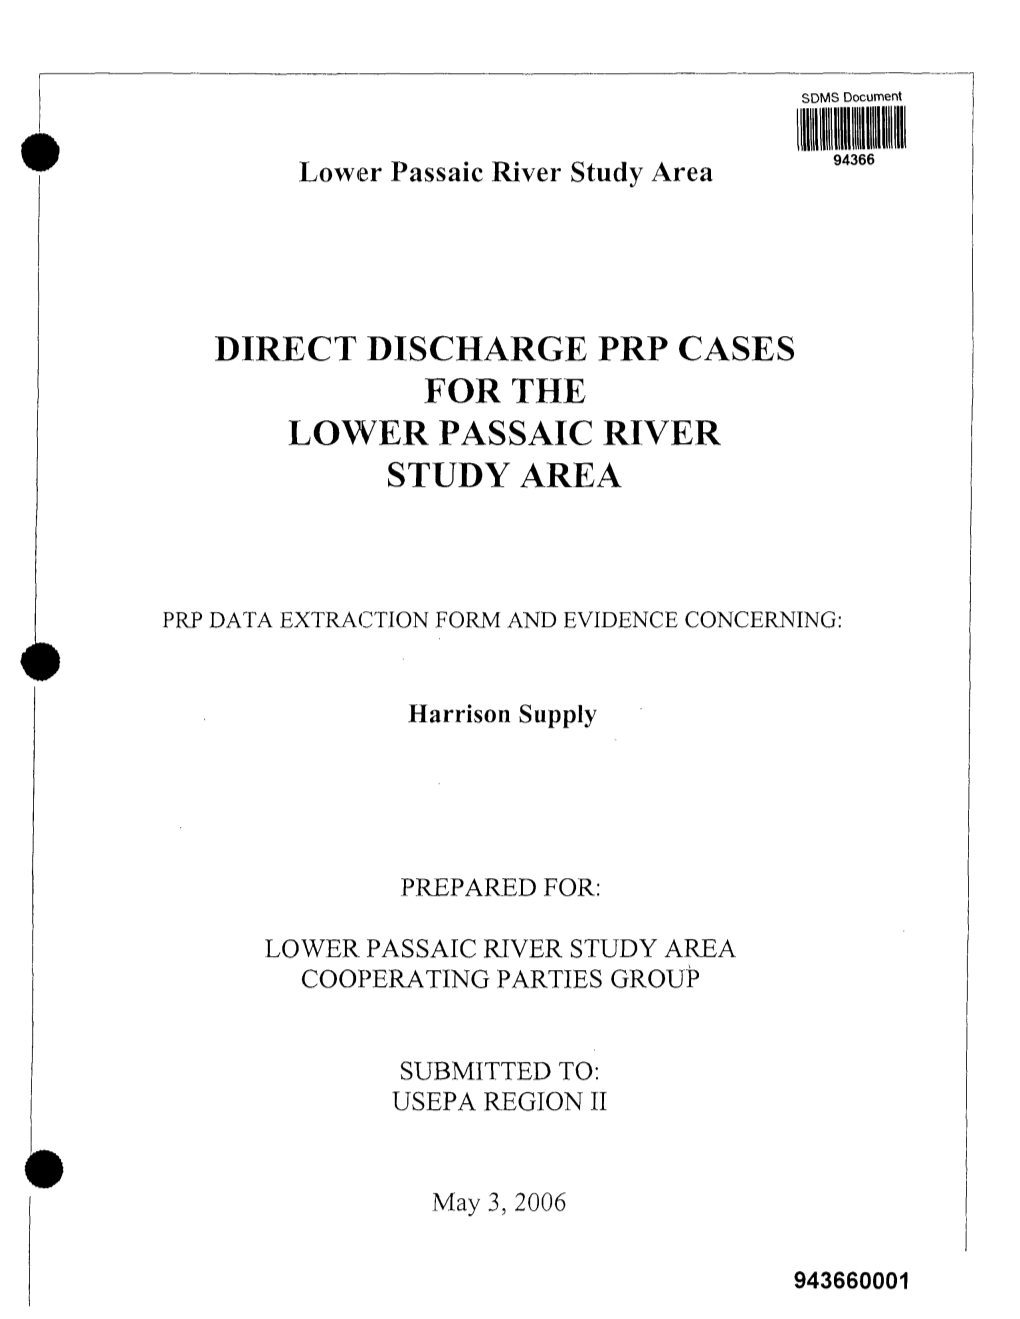 Direct Discharge Prp Cases for the Lower Passaic River Study Area